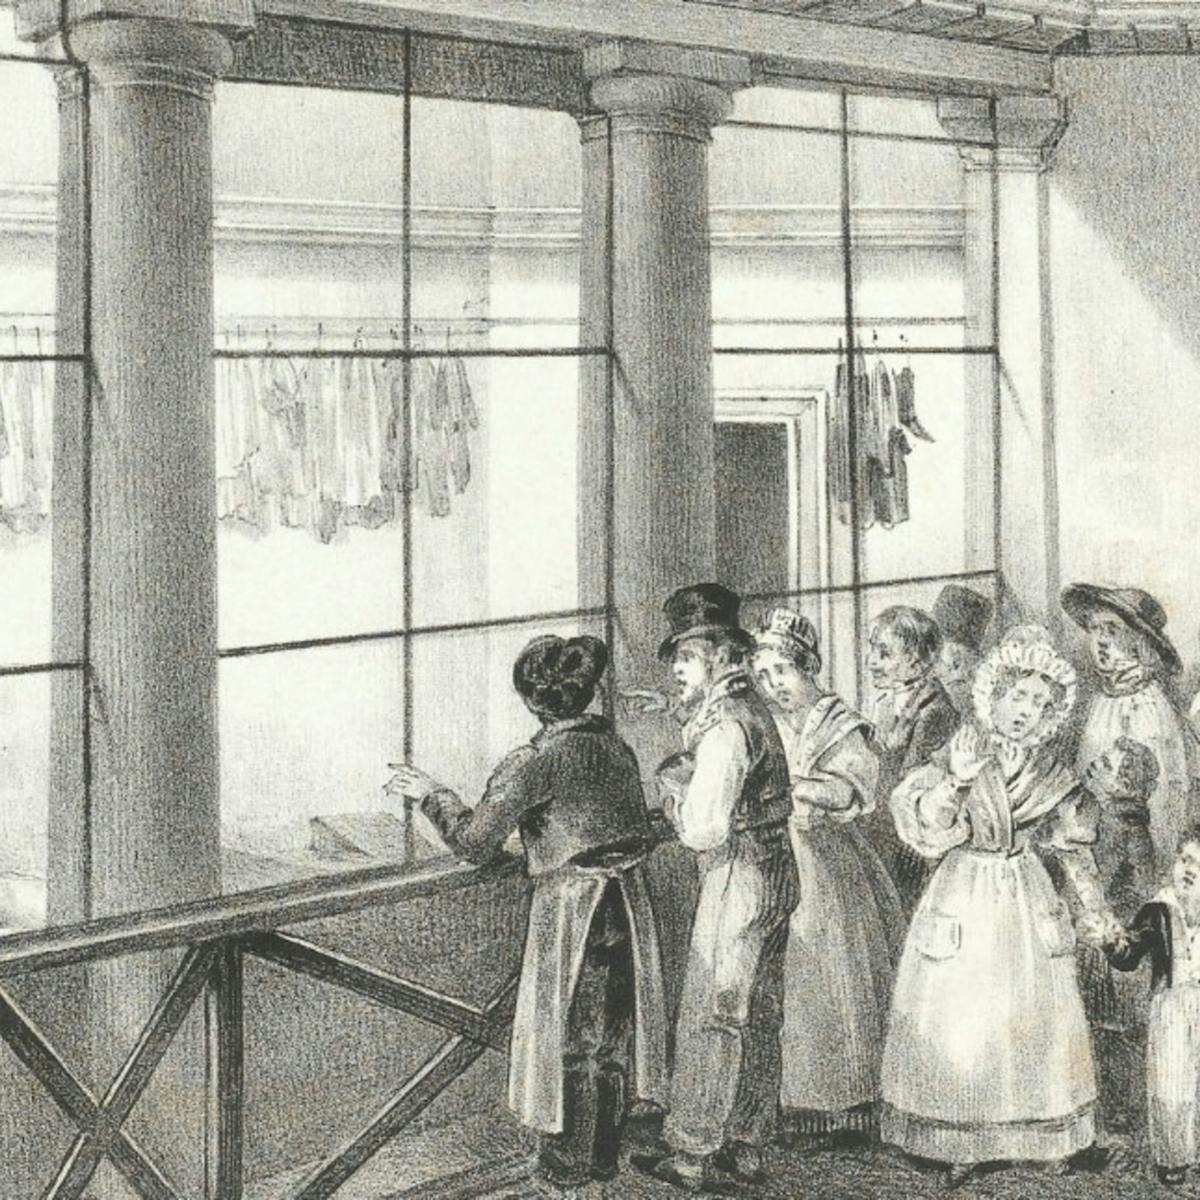 Black and white engraving of people in the 19th century viewing cadavers in a morgue in Paris